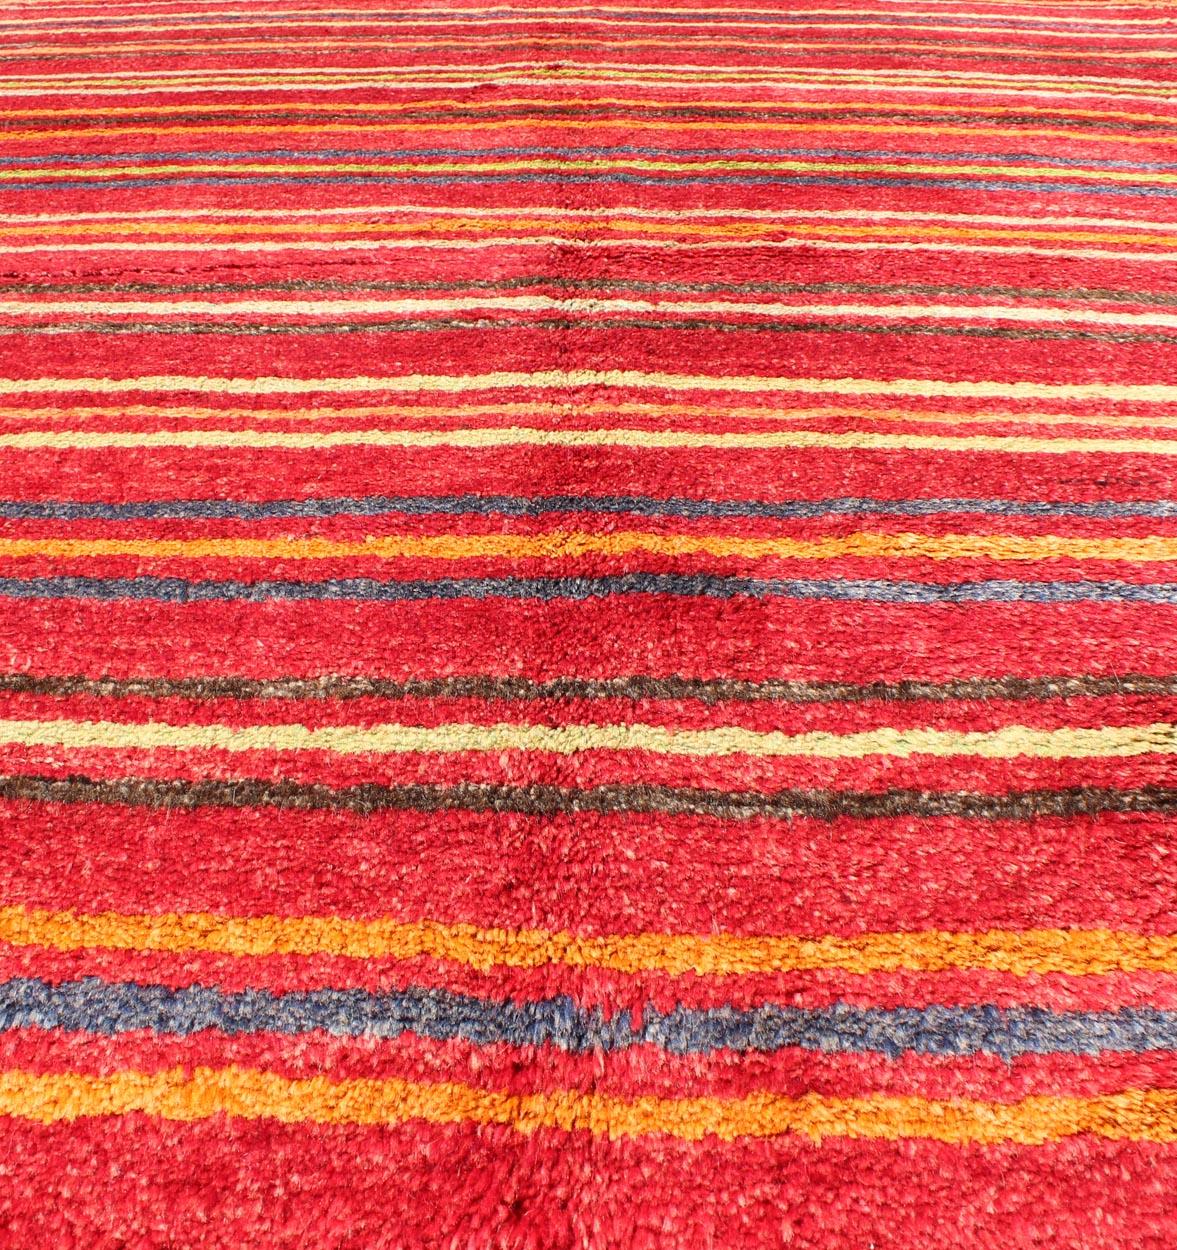 Turkish Tulu Carpet with Colorful Striped Pattern in Red, Orange, Blue, Green For Sale 3